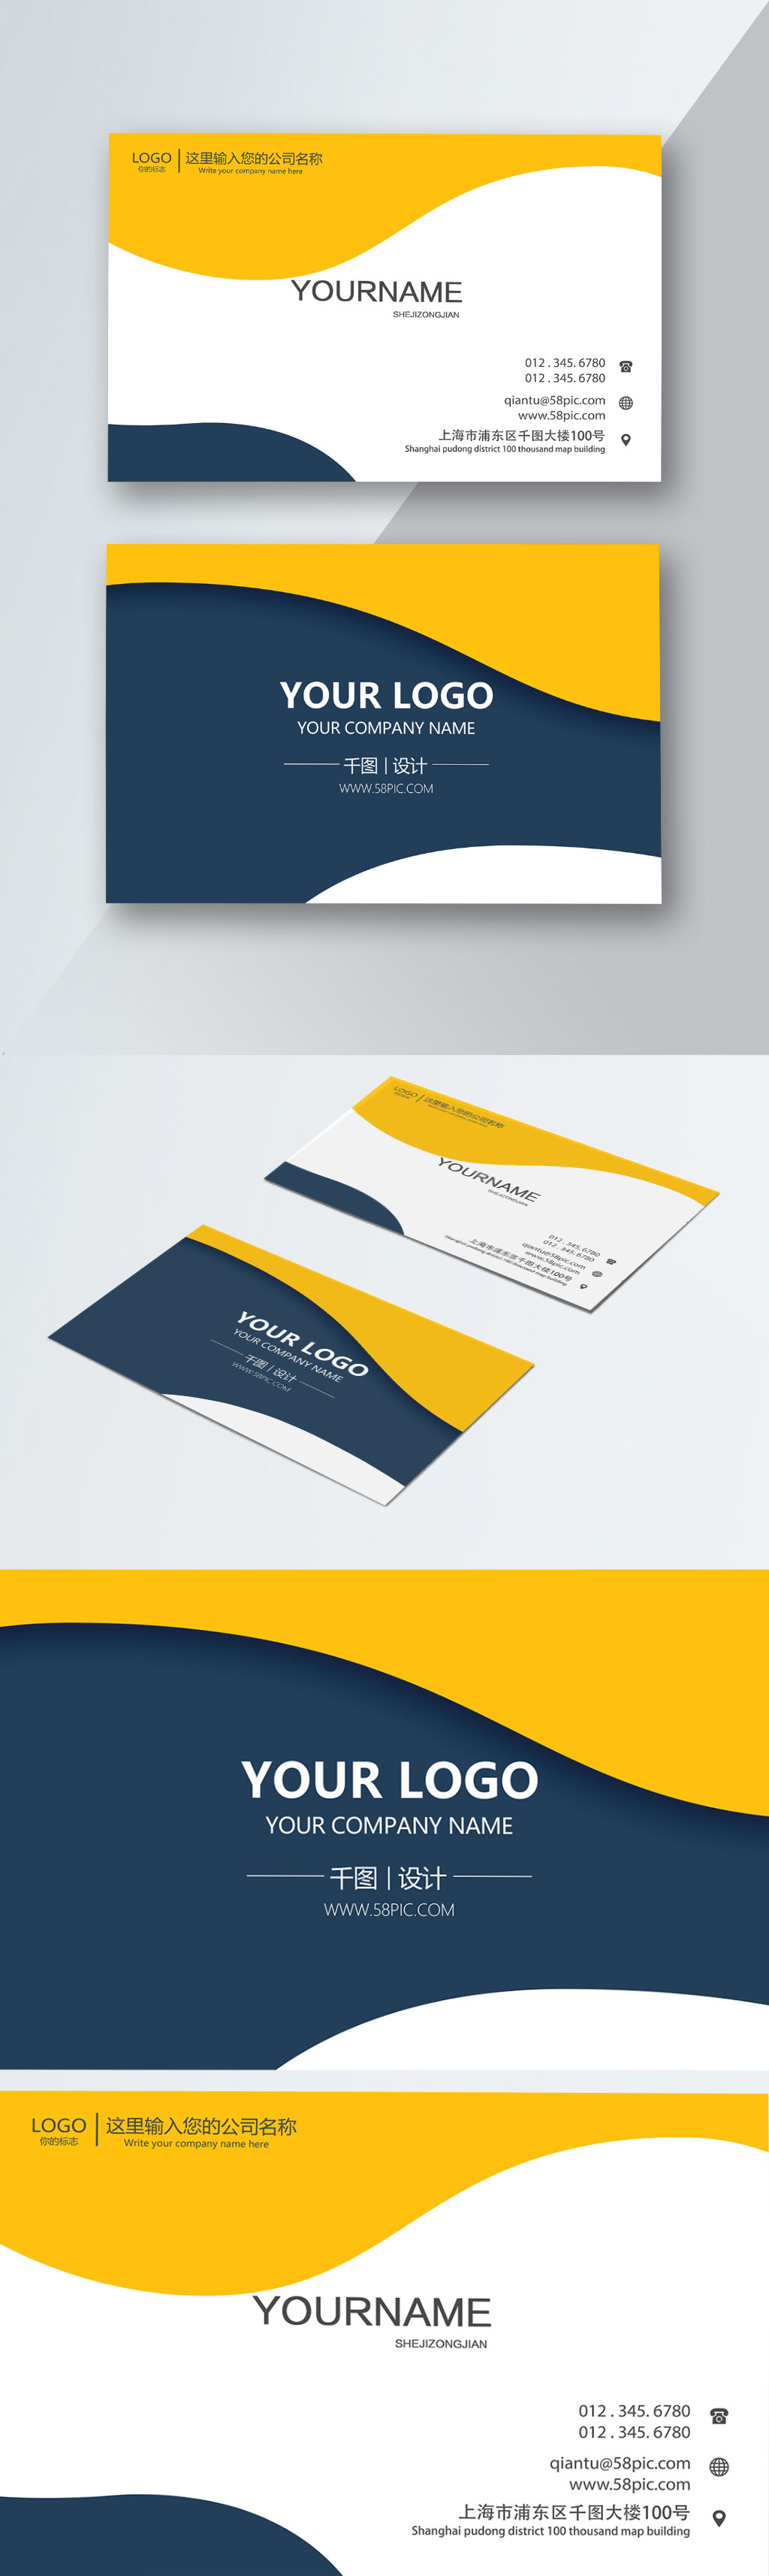 logistics-business-card-picture-template-image-picture-free-download